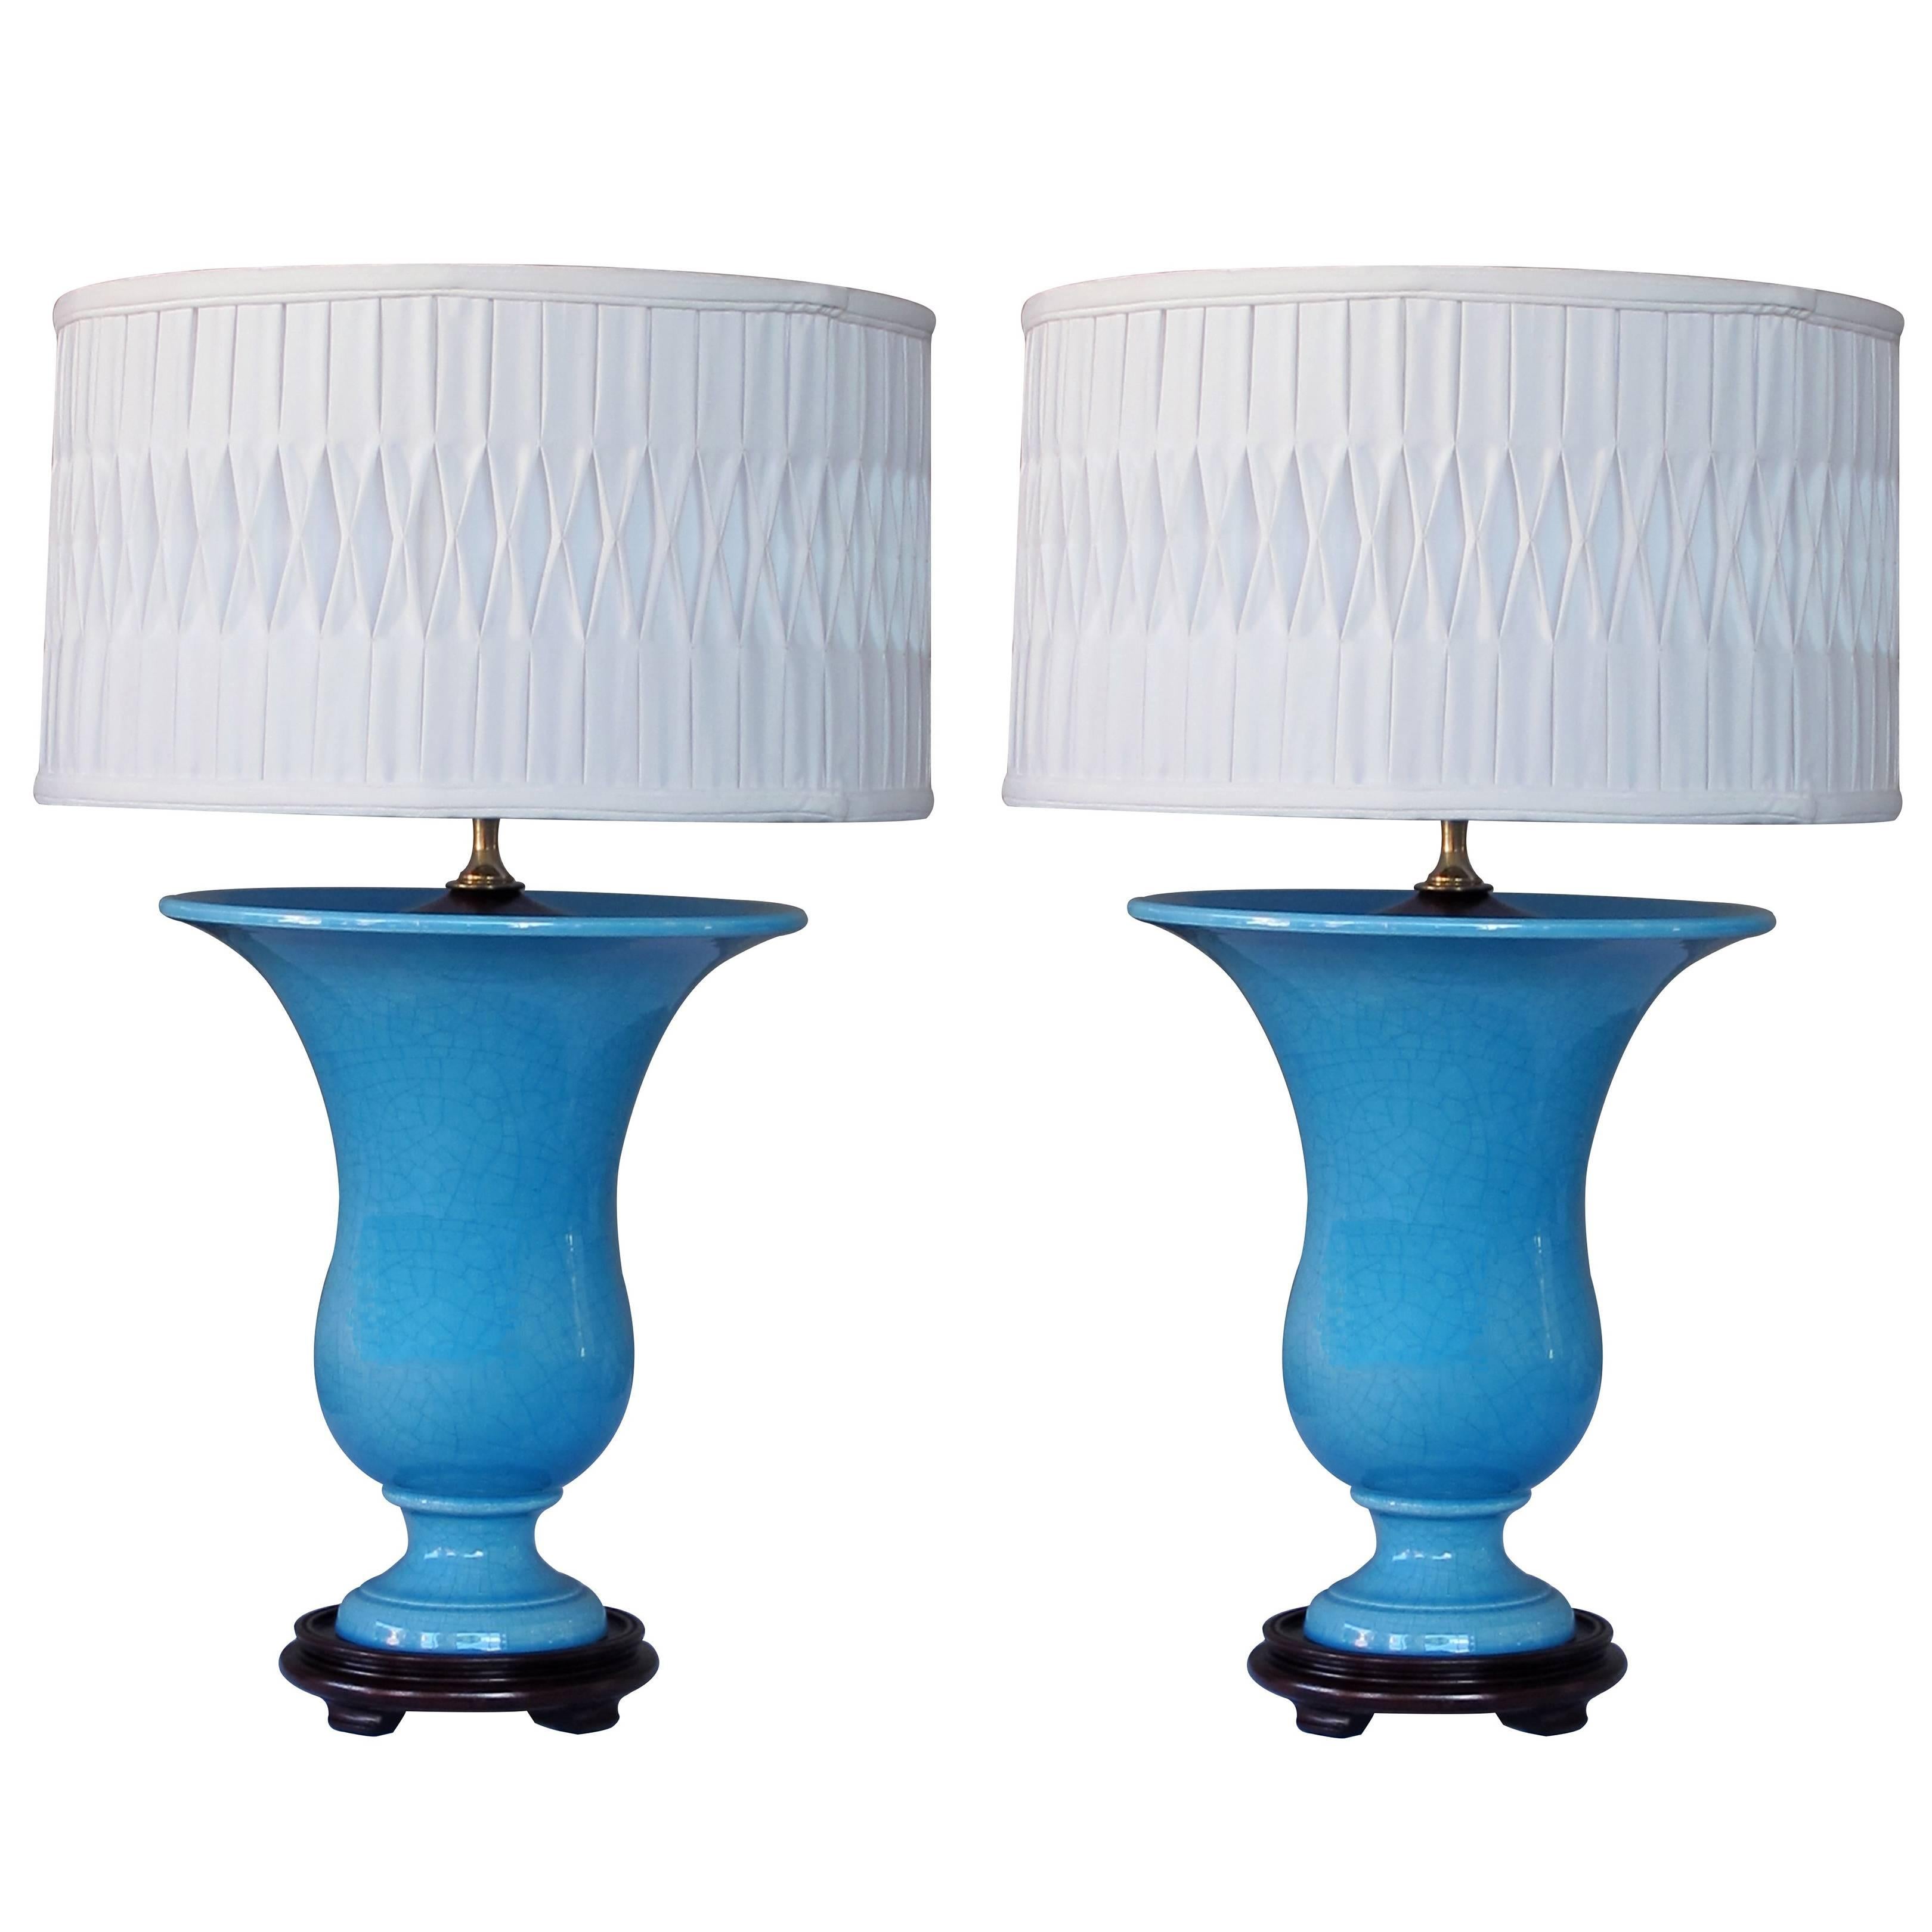 Striking Pair of French Art Deco Turquoise Crackle-Glazed Urns Now Lamps For Sale